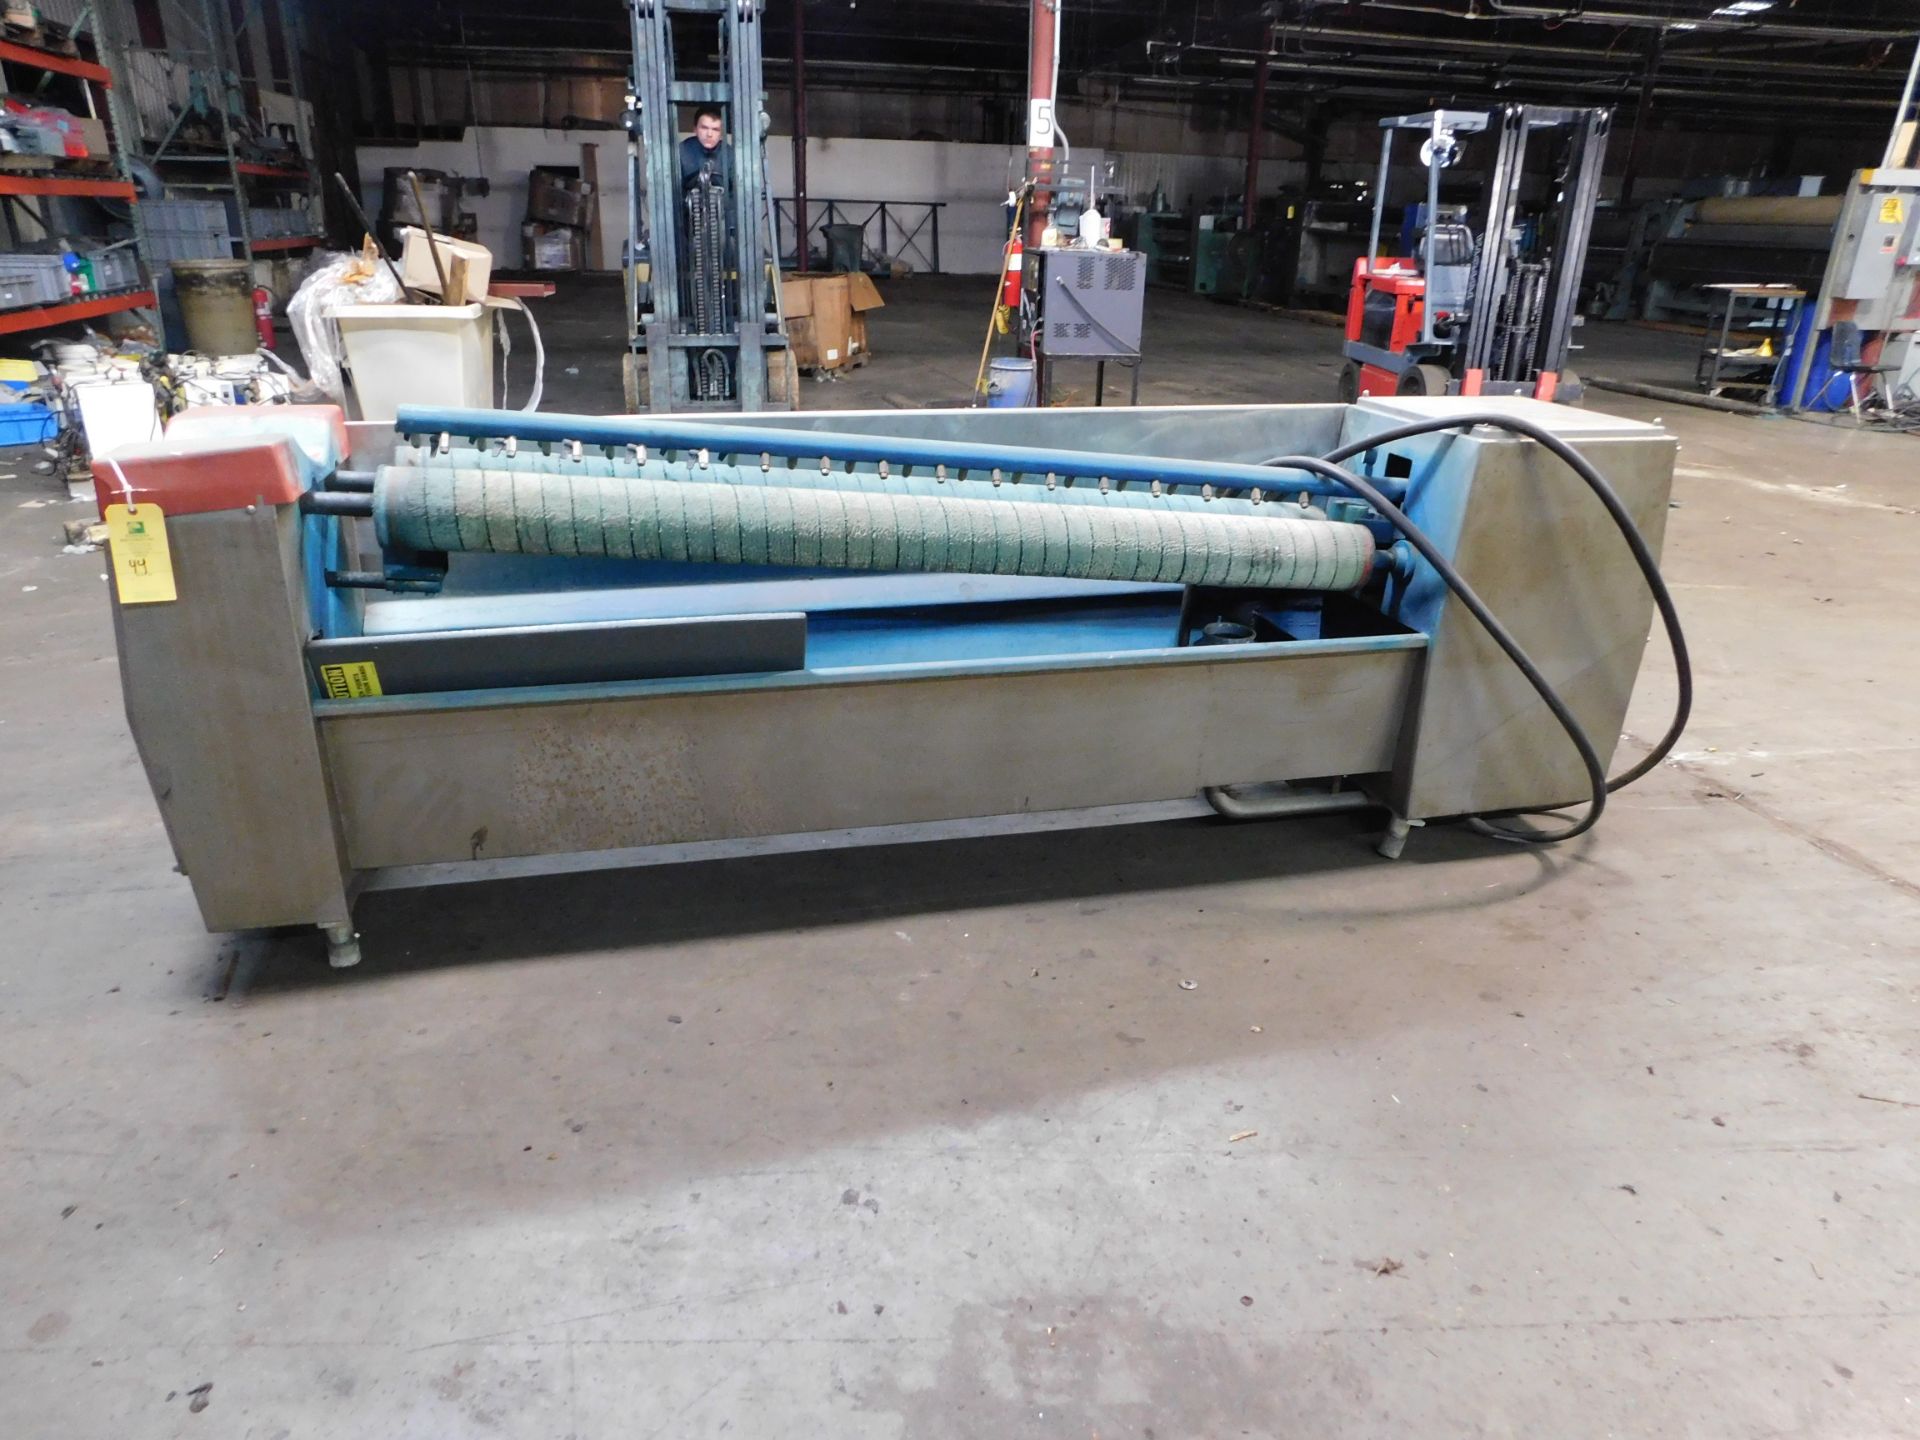 Stork screen washing, Working Width 67 3/4", Screen washer for Rotary screens, Good Condition,